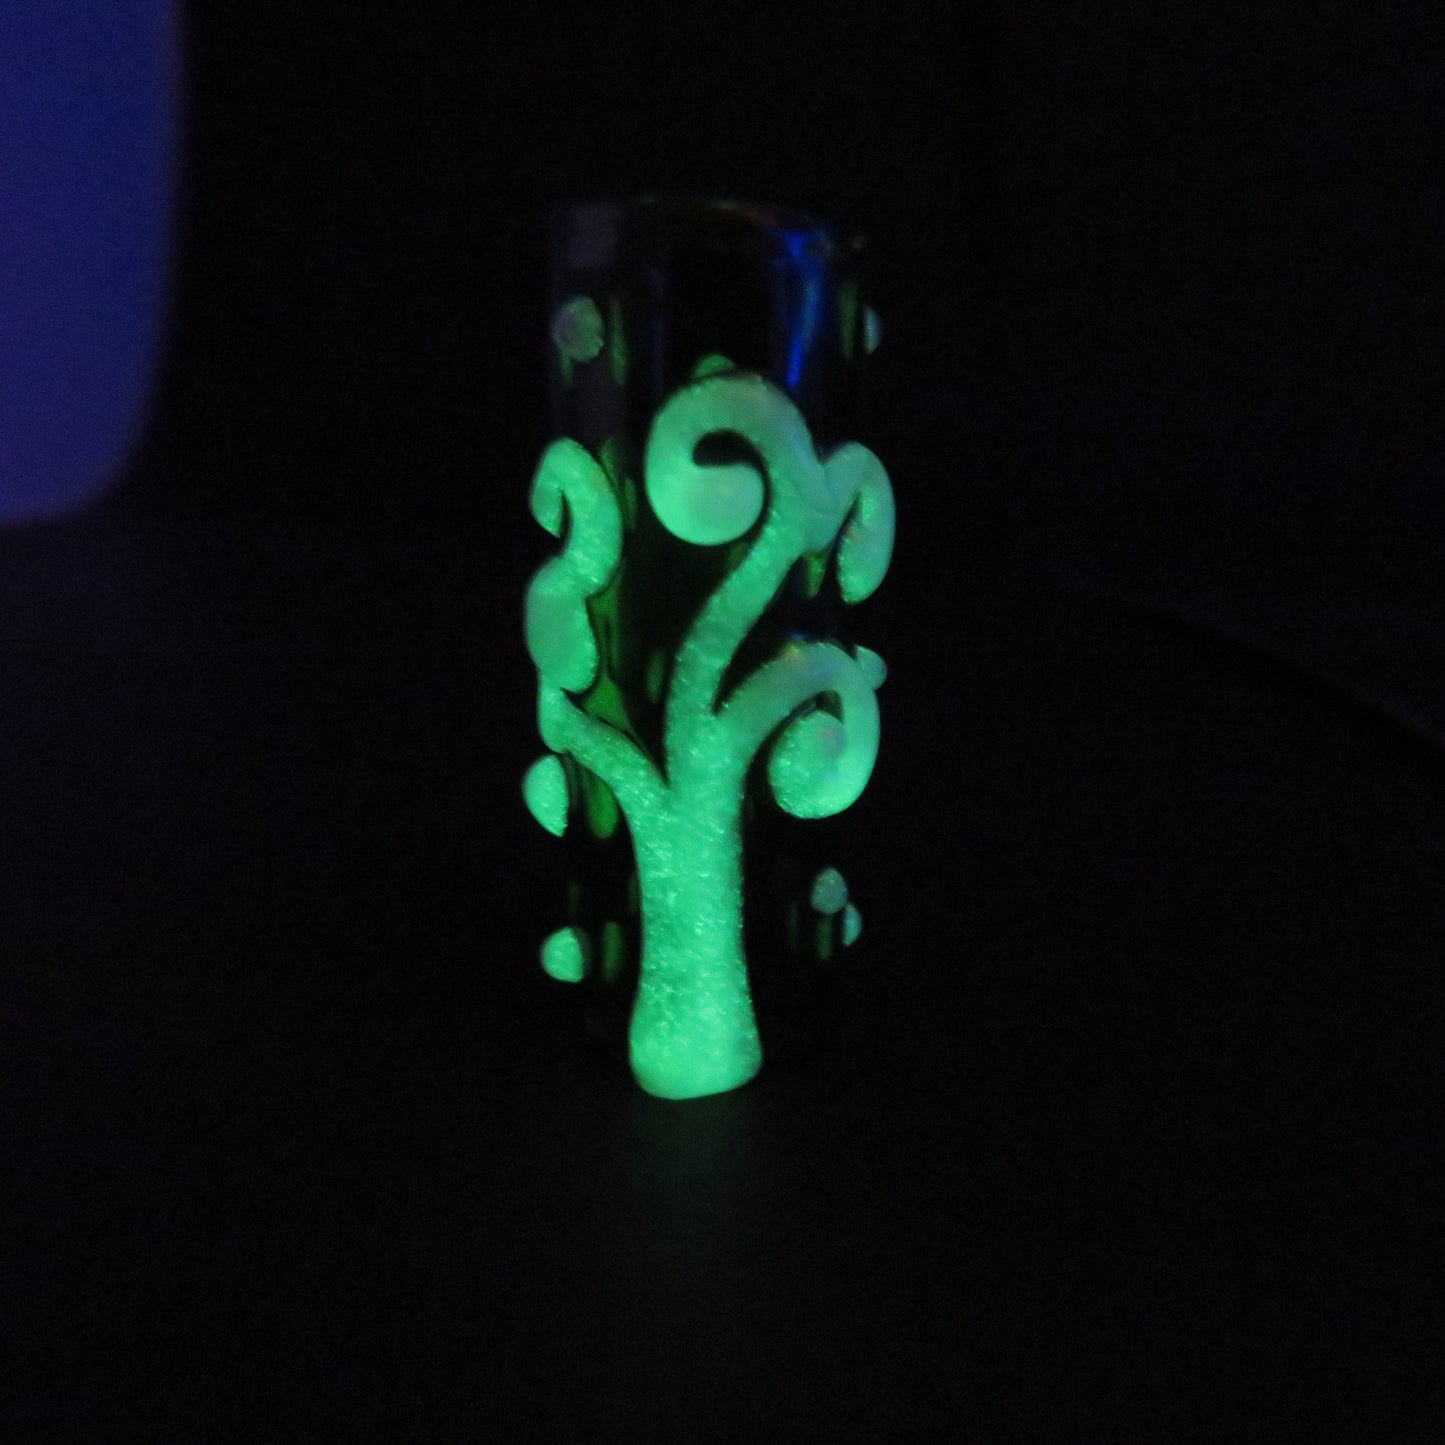 Glow in the Dark Spiral Tree on transparent green 8mm Bead Hole small size, Hand Blown Glass Dread Bead